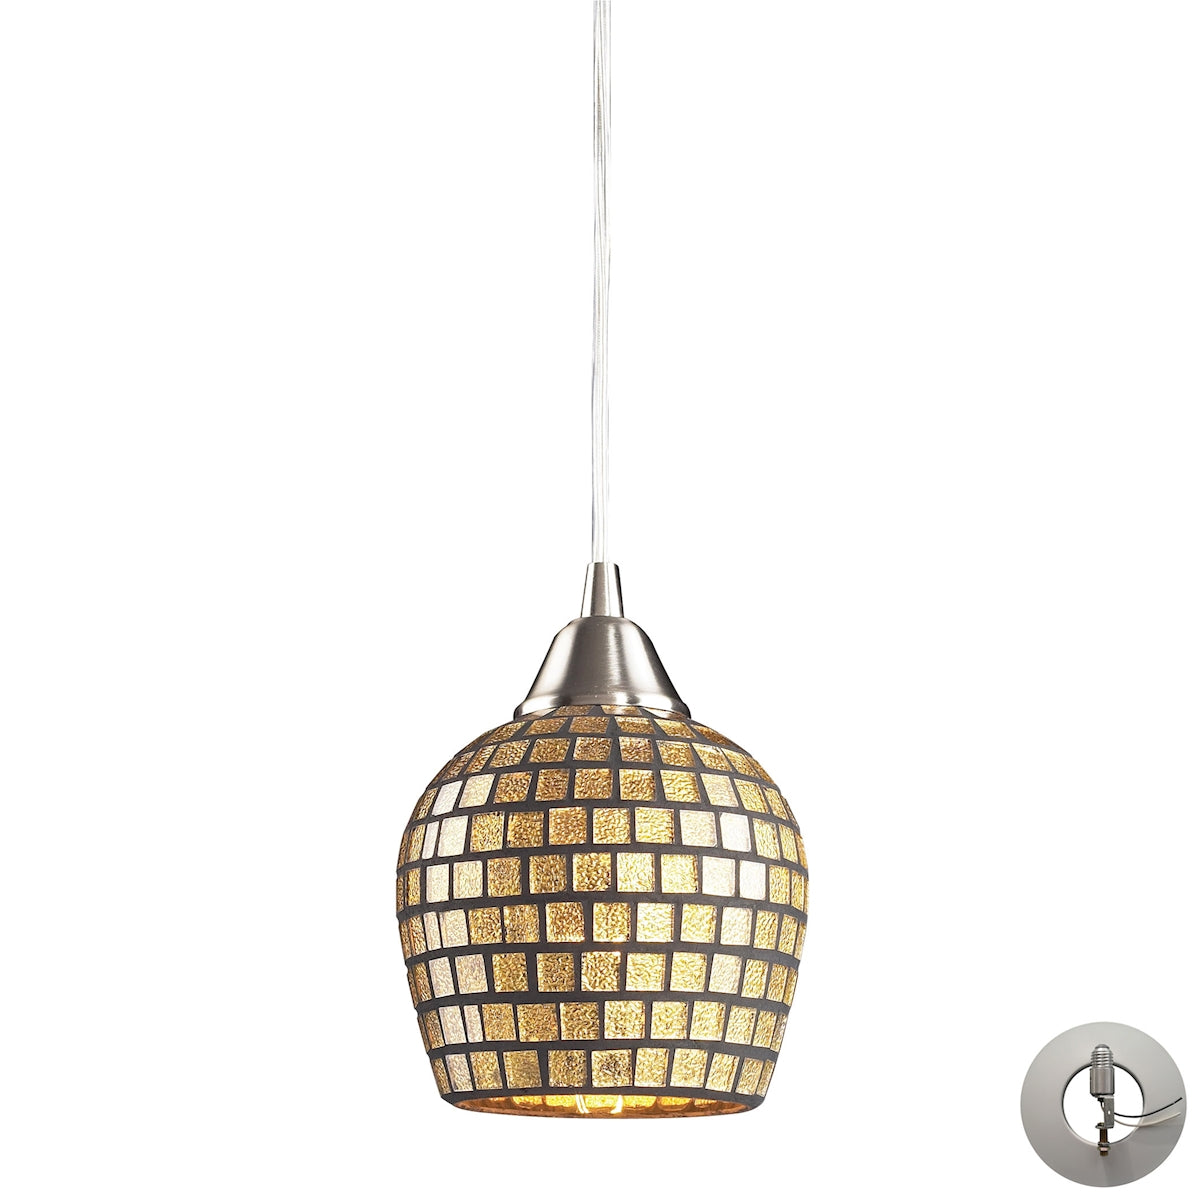 ELK Lighting 528-1GLD-LA Fusion 1-Light Mini Pendant in Satin Nickel with Gold Leaf Mosaic Glass - Includes Adapter Kit